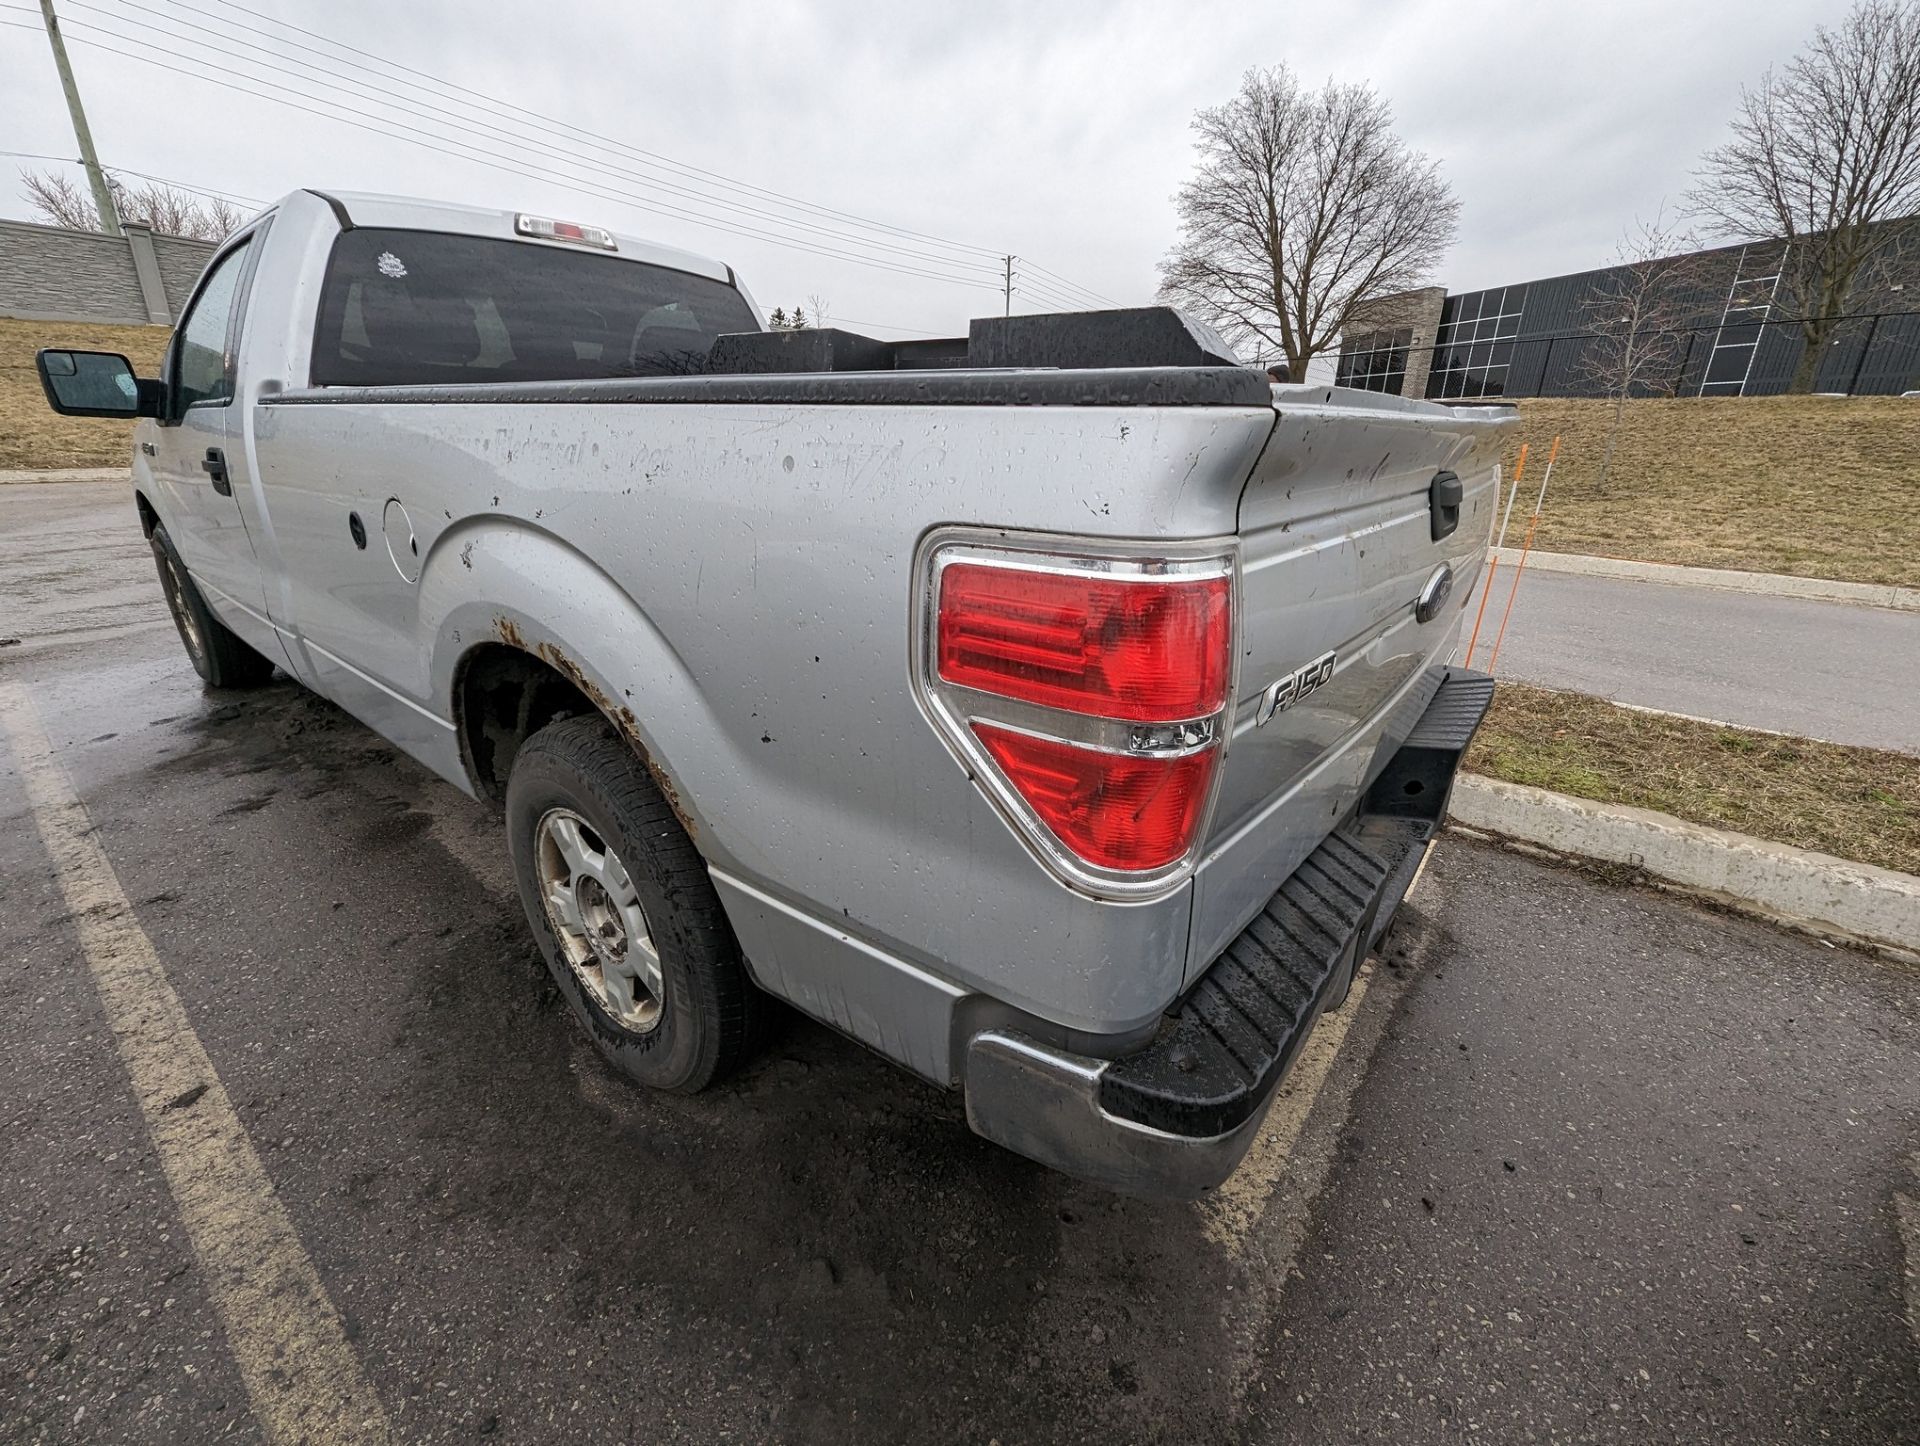 2013 FORD F150 XLT PICKUP TRUCK, VIN# 1FTNF1CF6DKD33131, APPROX. 315,106KMS (NO BLACK TOOL BOXES) - Image 7 of 12